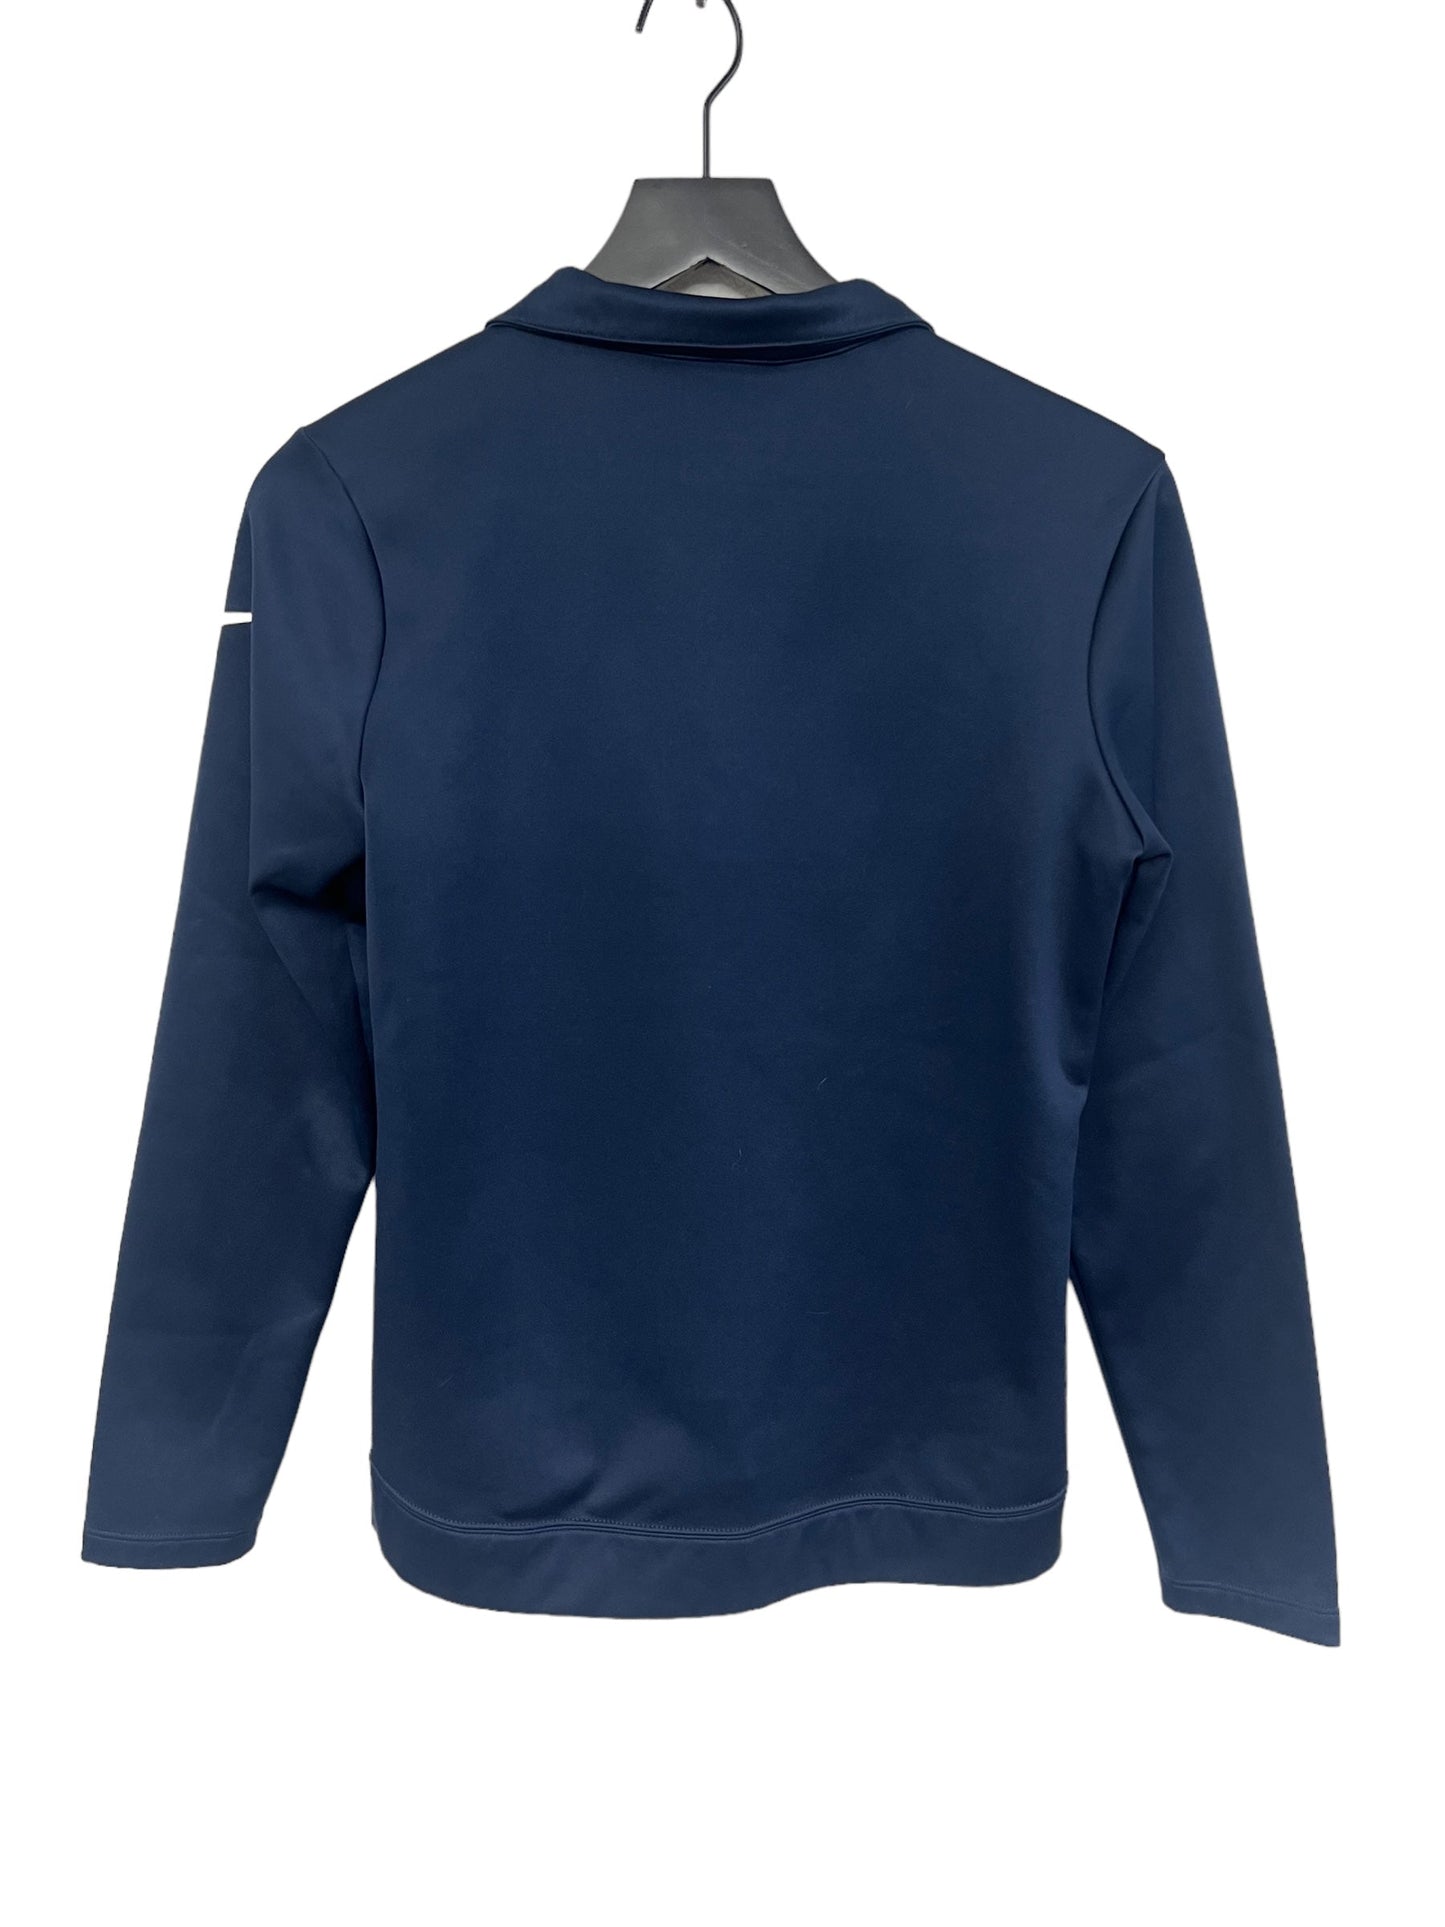 Navy Athletic Top Long Sleeve Collar Nike Apparel, Size S